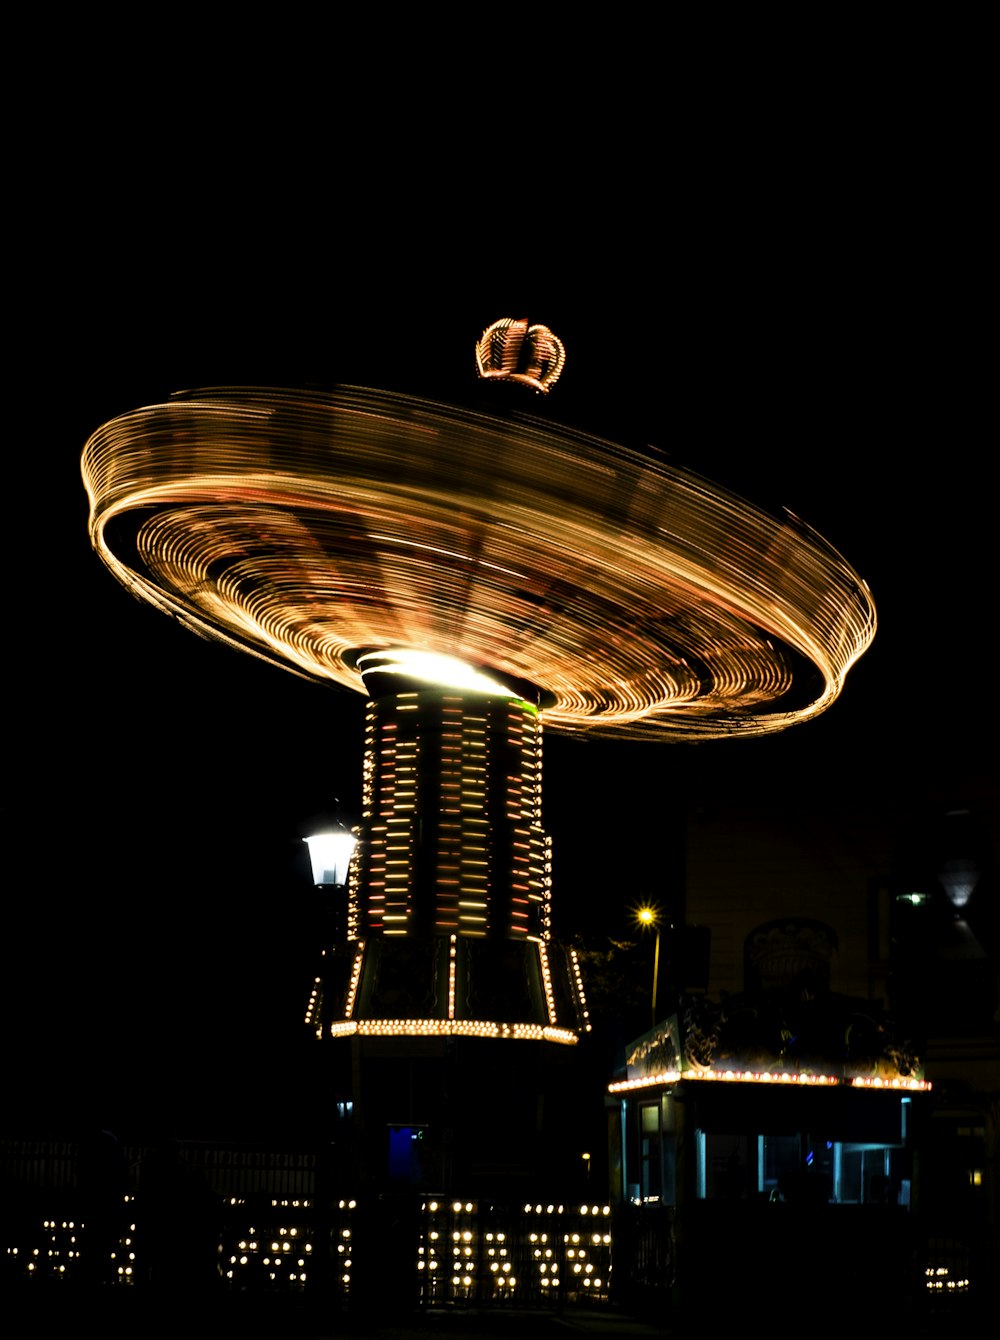 time lapse photography of lights on carousel during night time